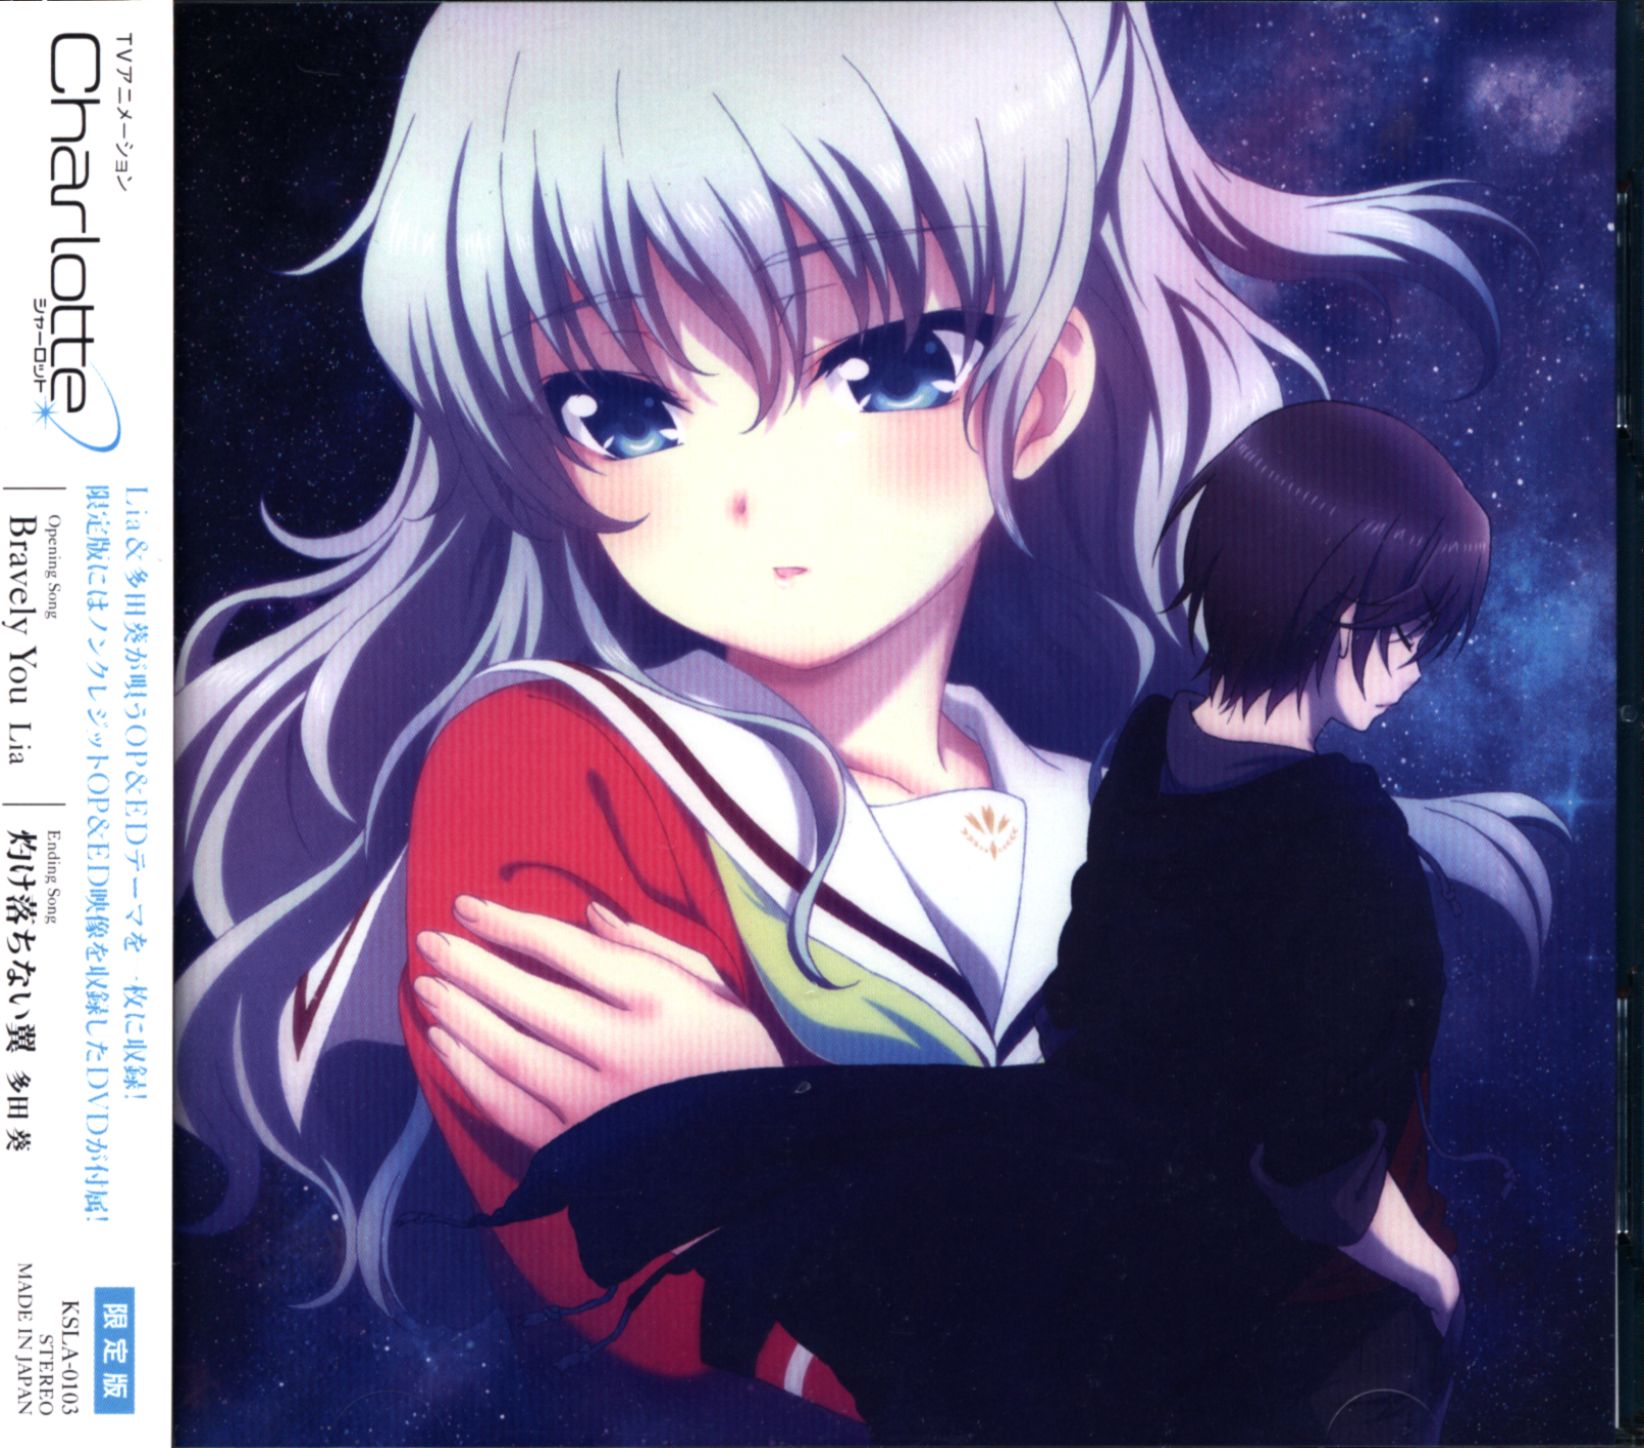 Anime Cd Tv Anime Charlotte Op Ed Bravely You Lia Burning Aoi Tsubasa Tada Which Do Not Fall Limited Edition Disc With Dvd Mandarake Online Shop